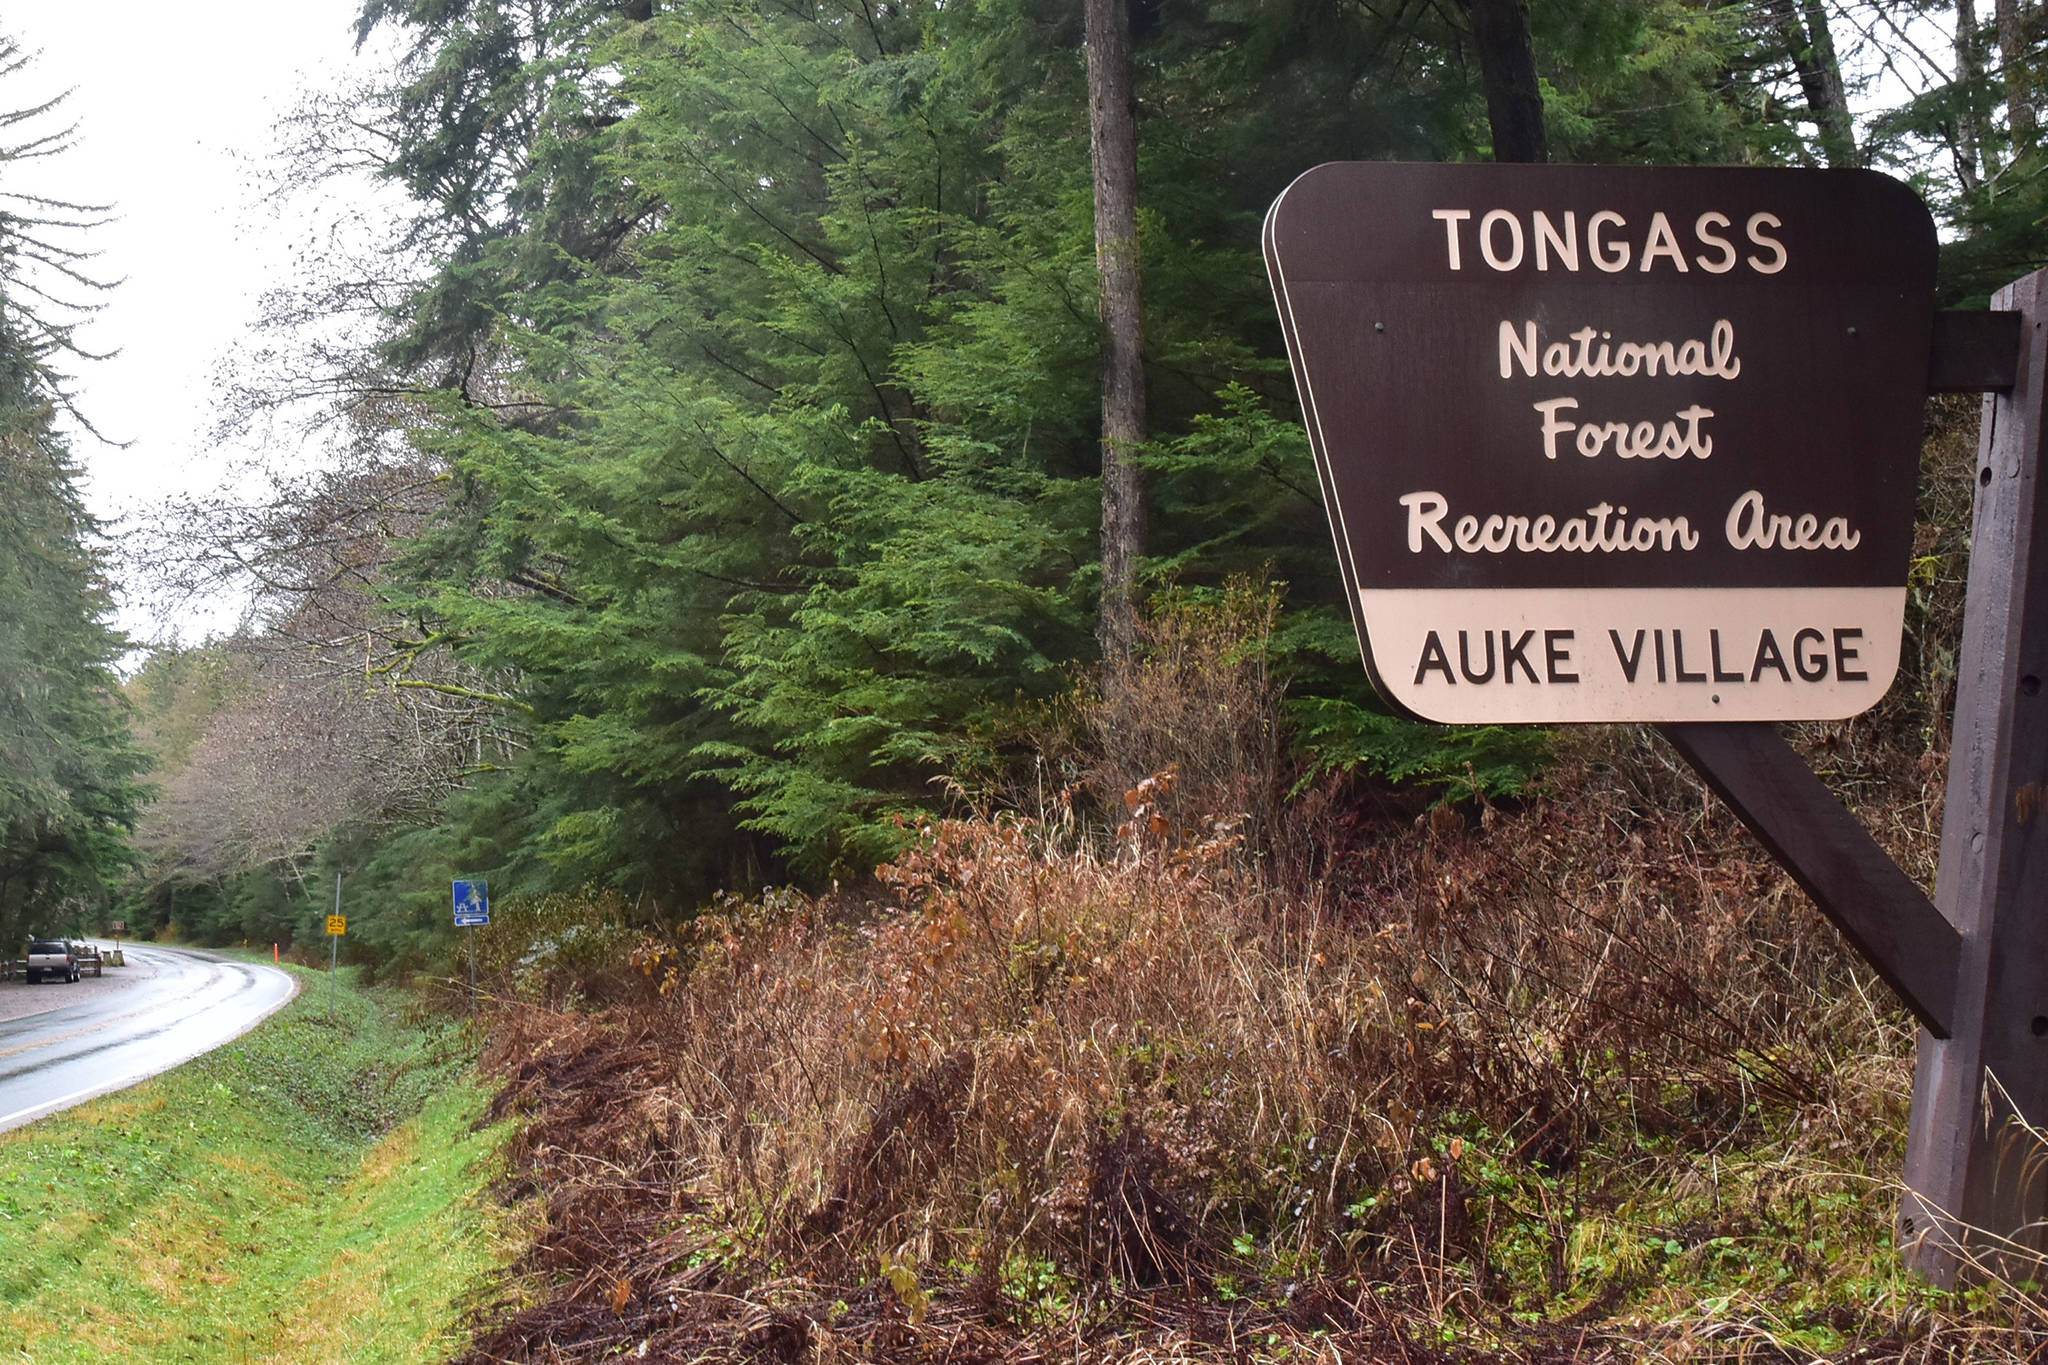 Peter Segall / Juneau Empire
A Tongass National Forest sign stands near the Auke Village Recreation Area. On Wednesday, the United States Department of Agriculture announced its decision to exempt the nation’s largest national forest from the Roadless Rule. Proponents say the rule change will make it easier for responsible resource development while critics say it removes essential protections on critical environments.